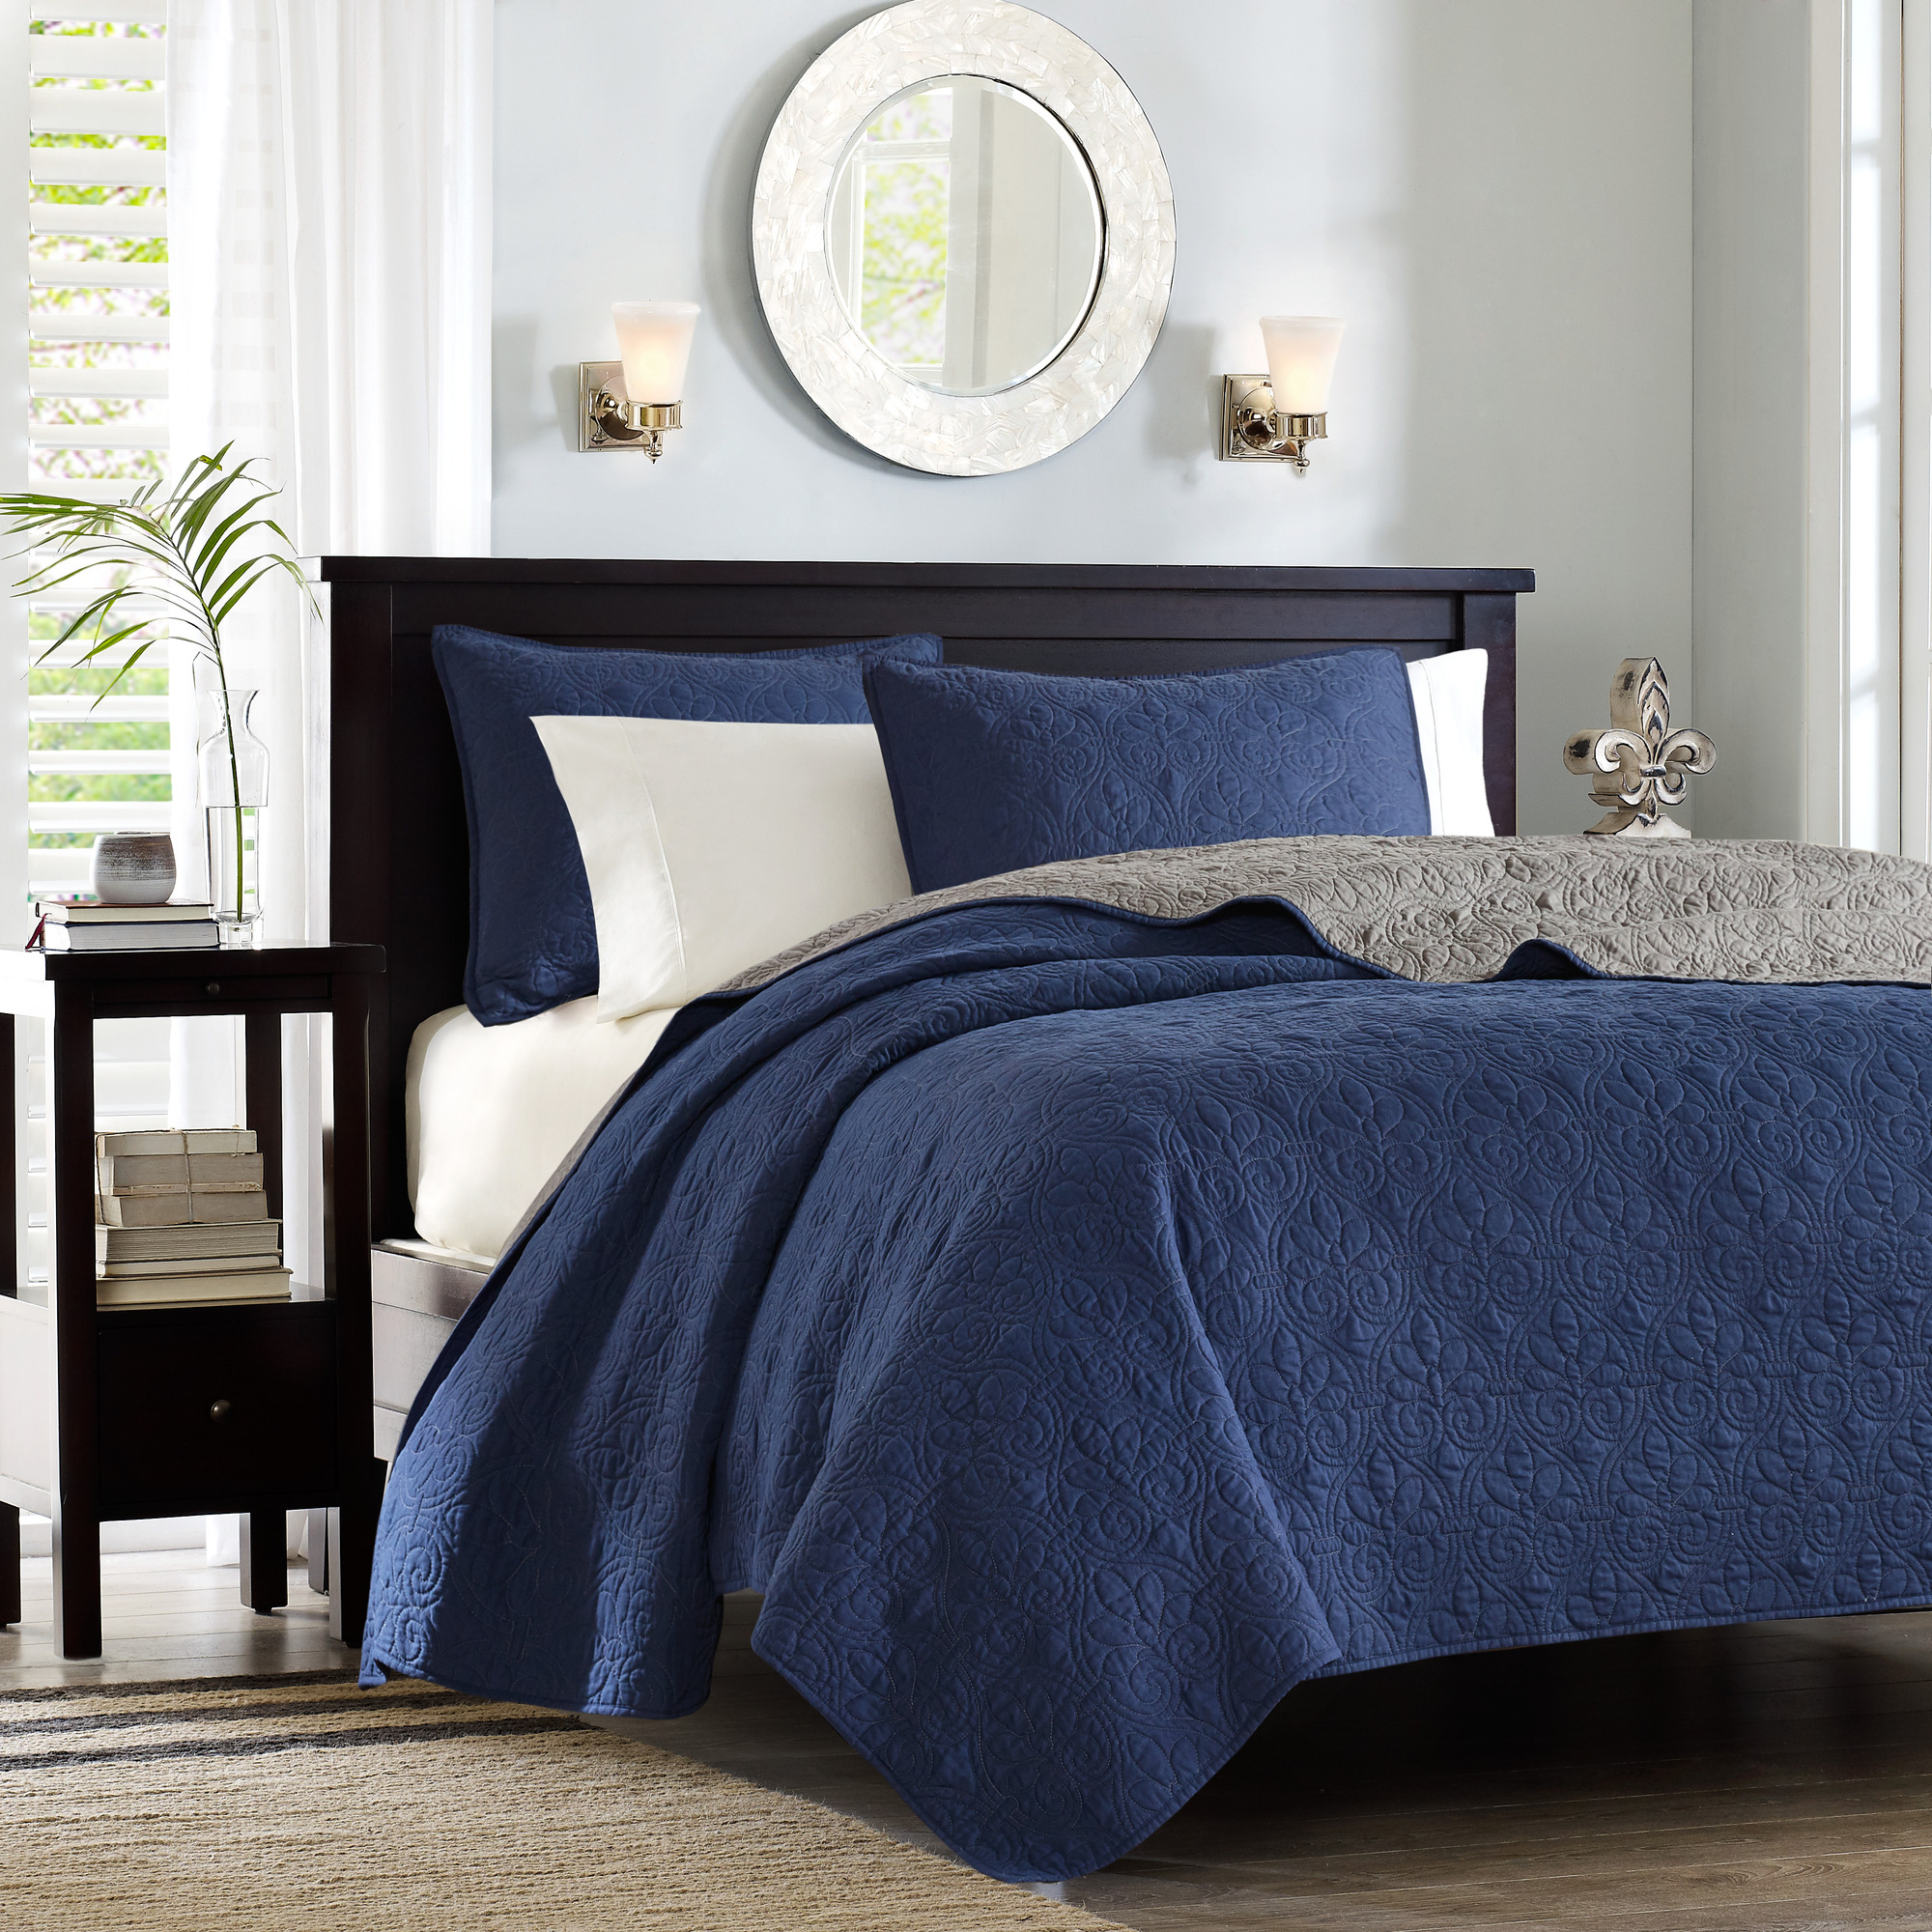 Home Essence Vancouver Super Soft Reversible Coverlet Set, Full/Queen, Navy / Dark Grey - image 1 of 22